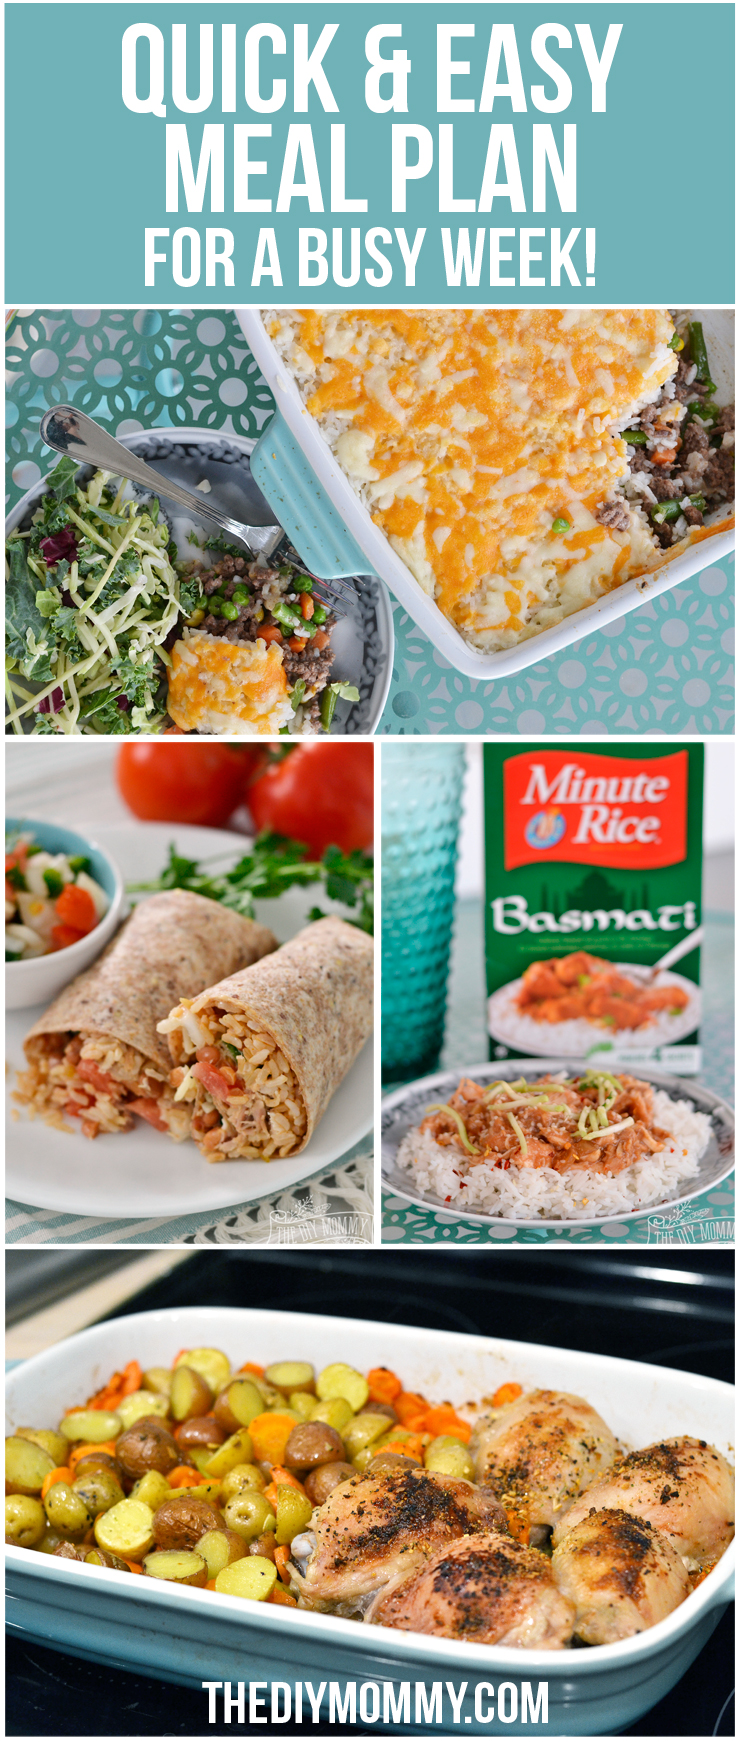 Fantastic, quick and healthy week meal plan for quick prep family dinners